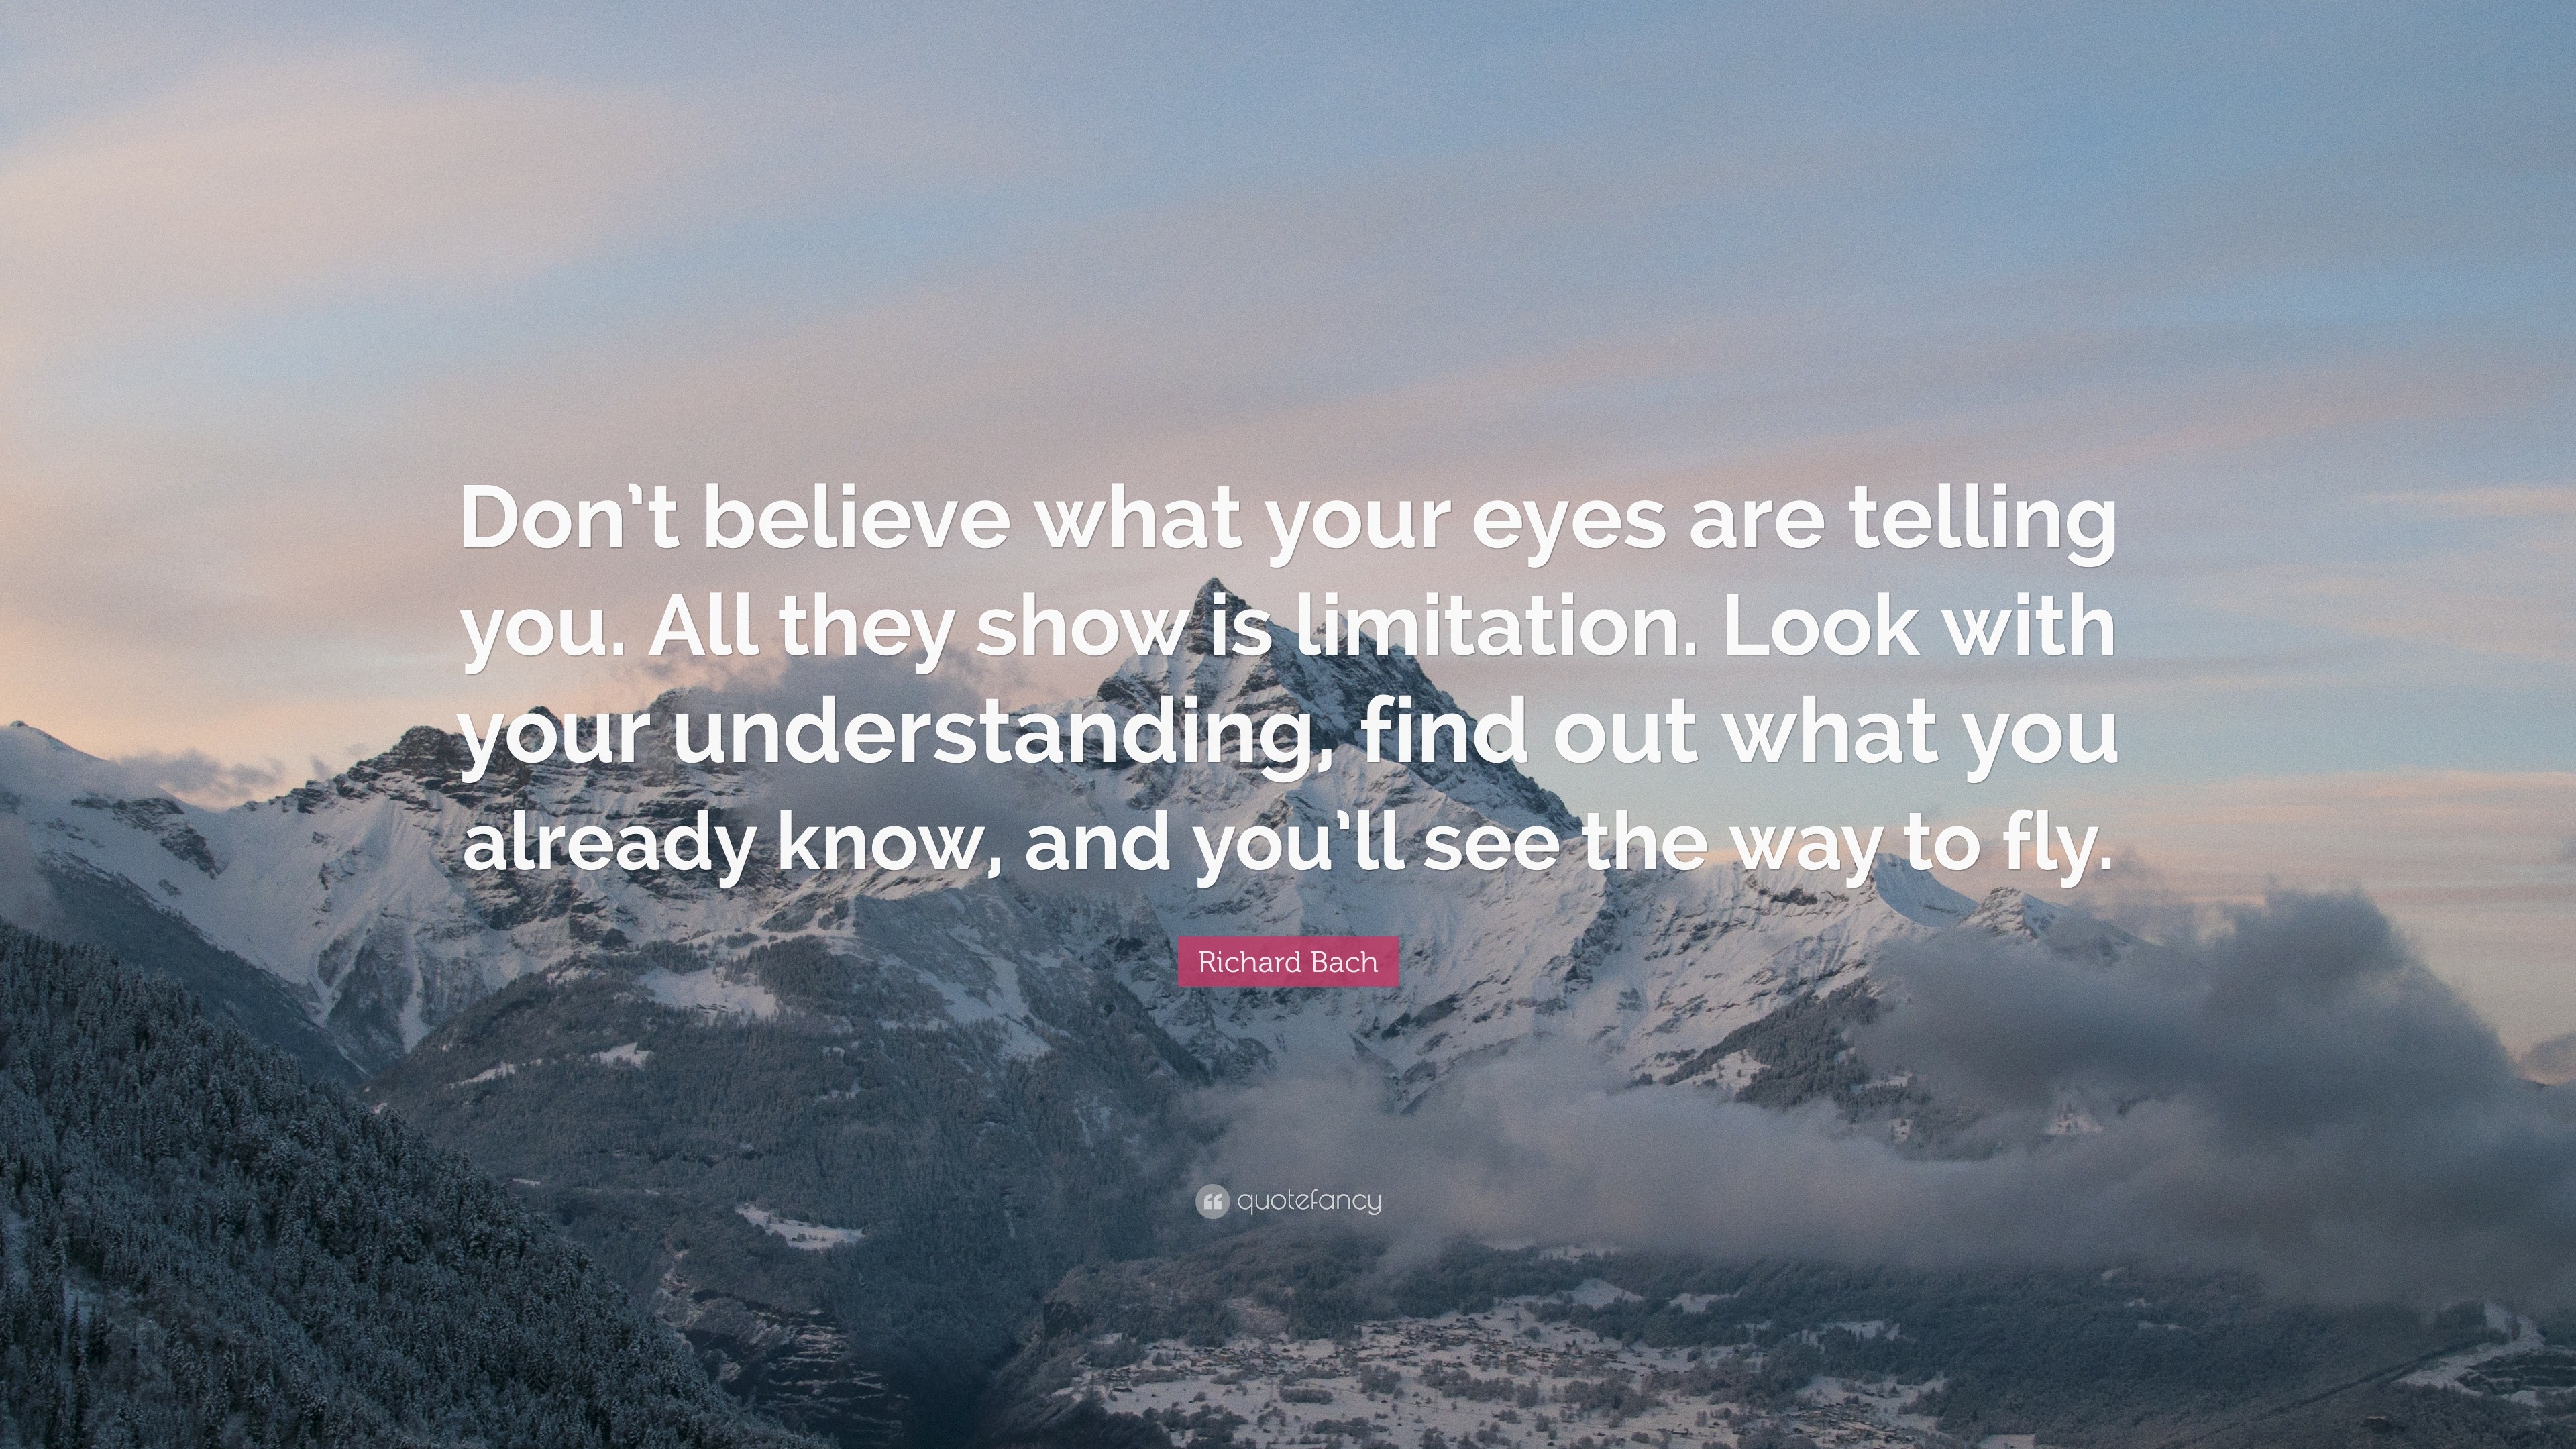 Richard Bach Quote: “Don’t believe what your eyes are telling you. All ...